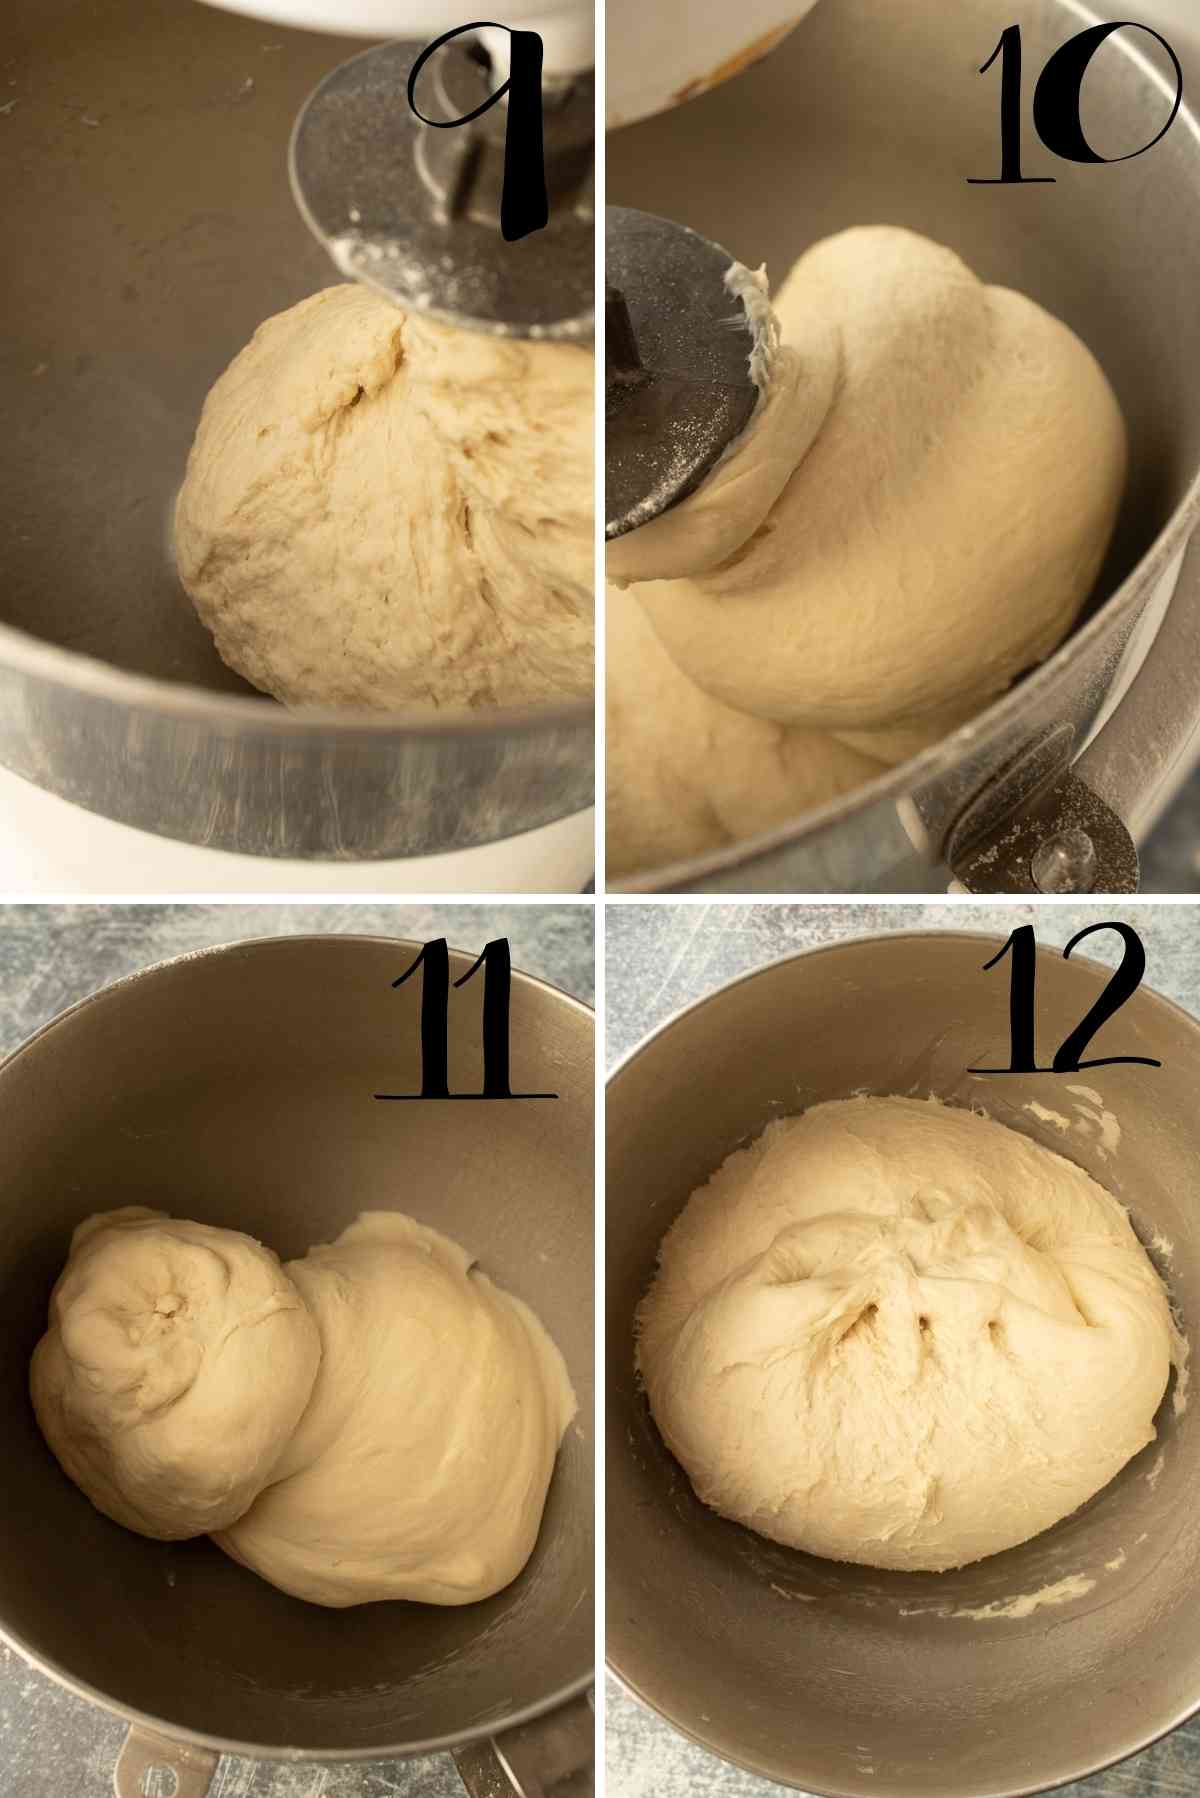 what dough looks like before kneading compared to after.